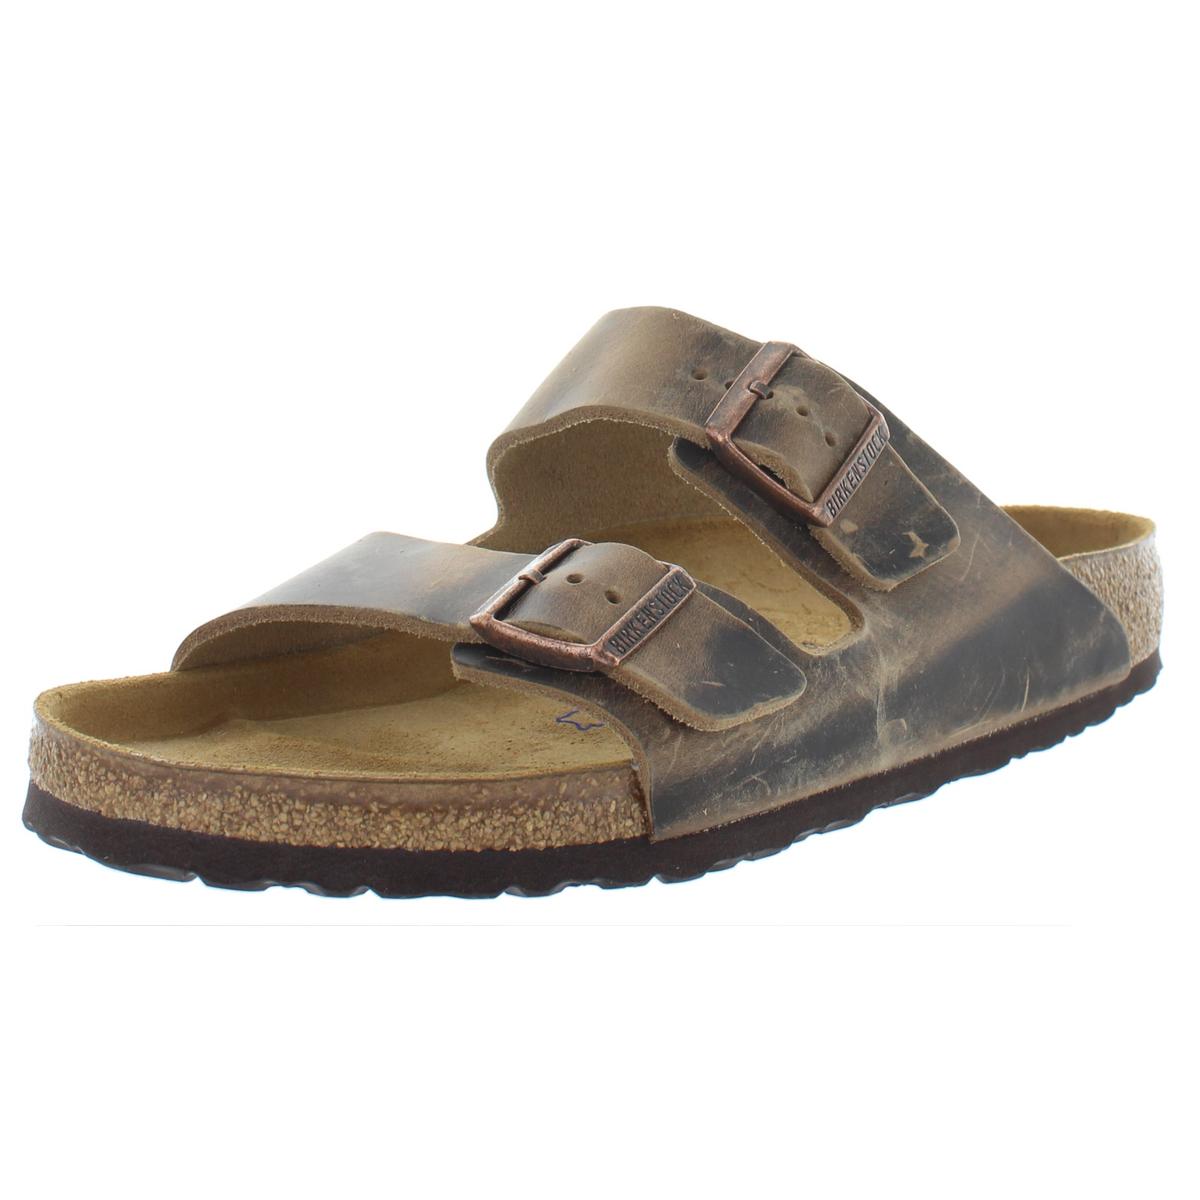 Birkenstock Mens Arizona BS Brown Leather Footbed Sandals Shoes 45 BHFO ...